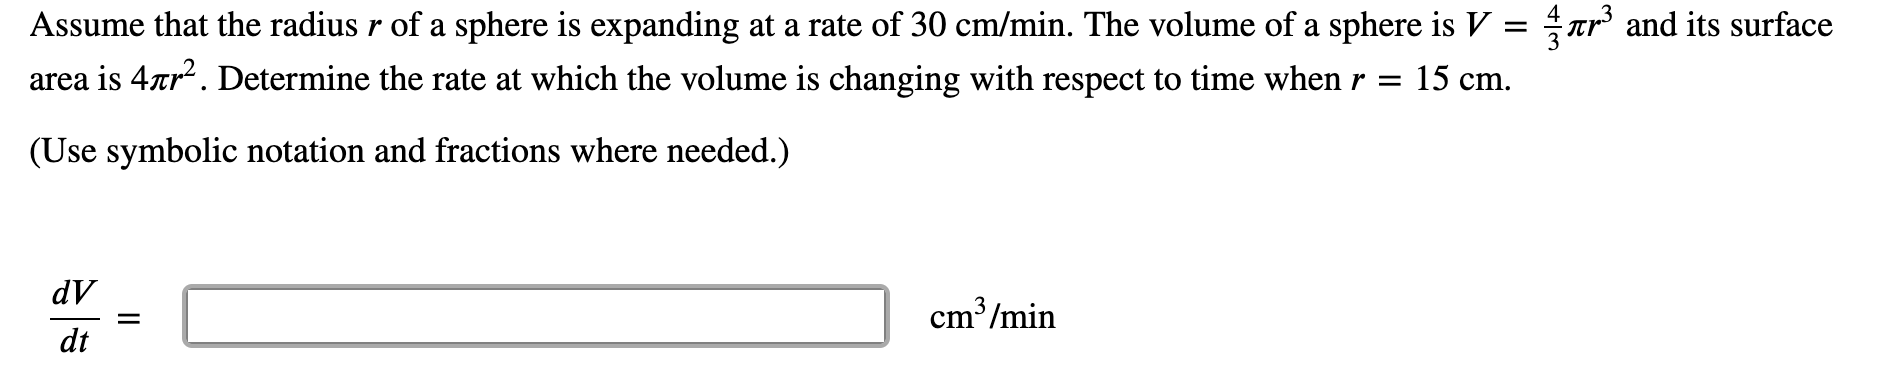 Assume that the radius r of a sphere is expanding at a rate of 30 cm/min. The volume of a sphere is V =
Tr and its surface
area is 4ar. Determine the rate at which the volume is changing with respect to time when r = 15 cm.
(Use symbolic notation and fractions where needed.)
dV
cm³/min
dt
